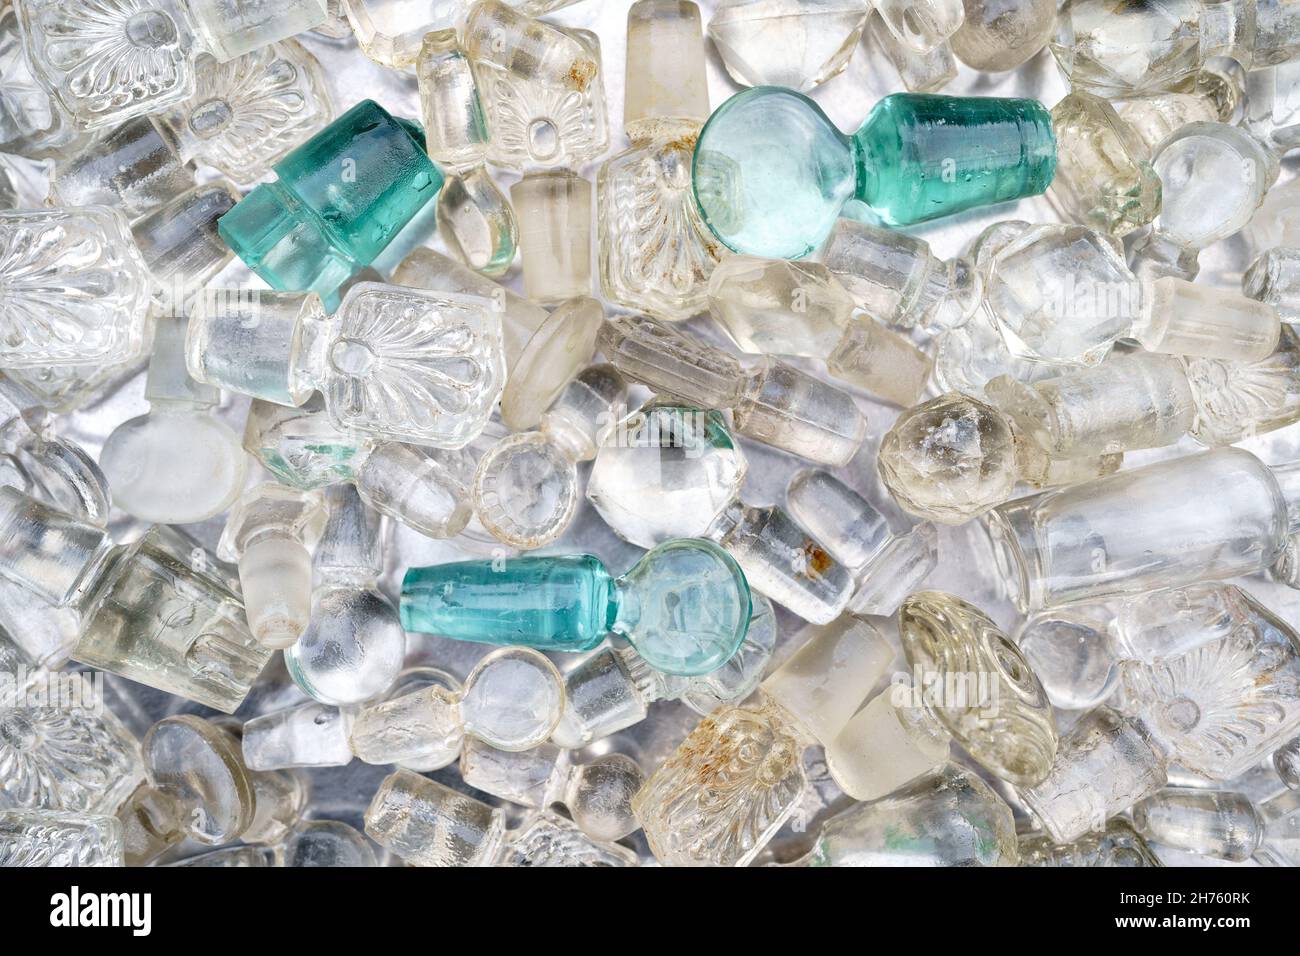 Closeup of lot of colored antique glass bottle stoppers from decanters, liquor and flasks with traces of use Stock Photo